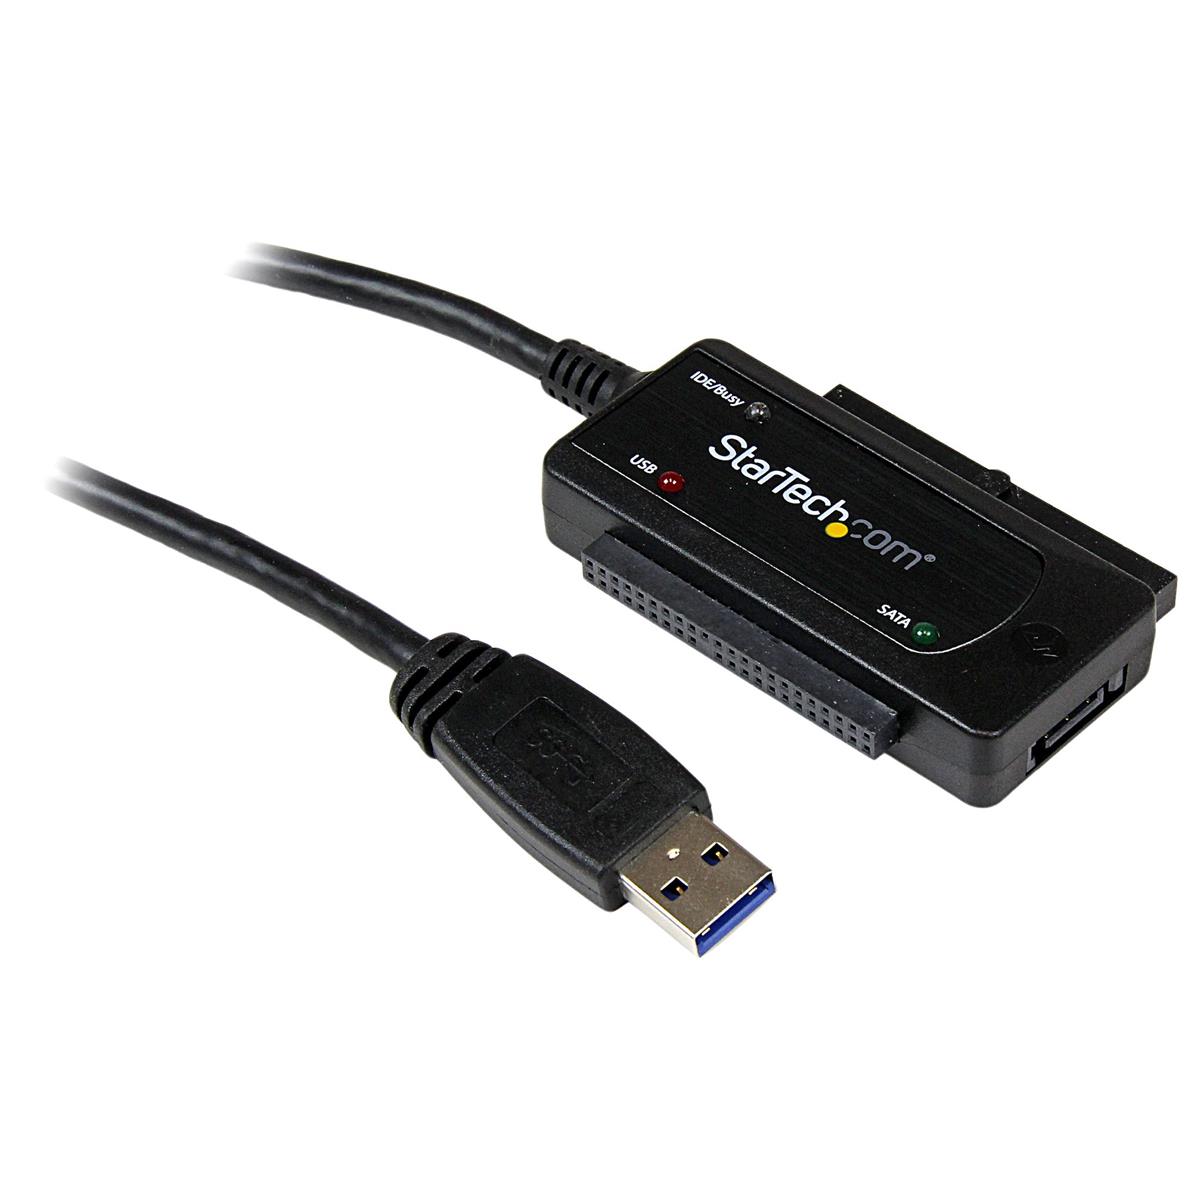 Image of StarTech USB 3.0 to SATA or IDE Hard Drive Adapter